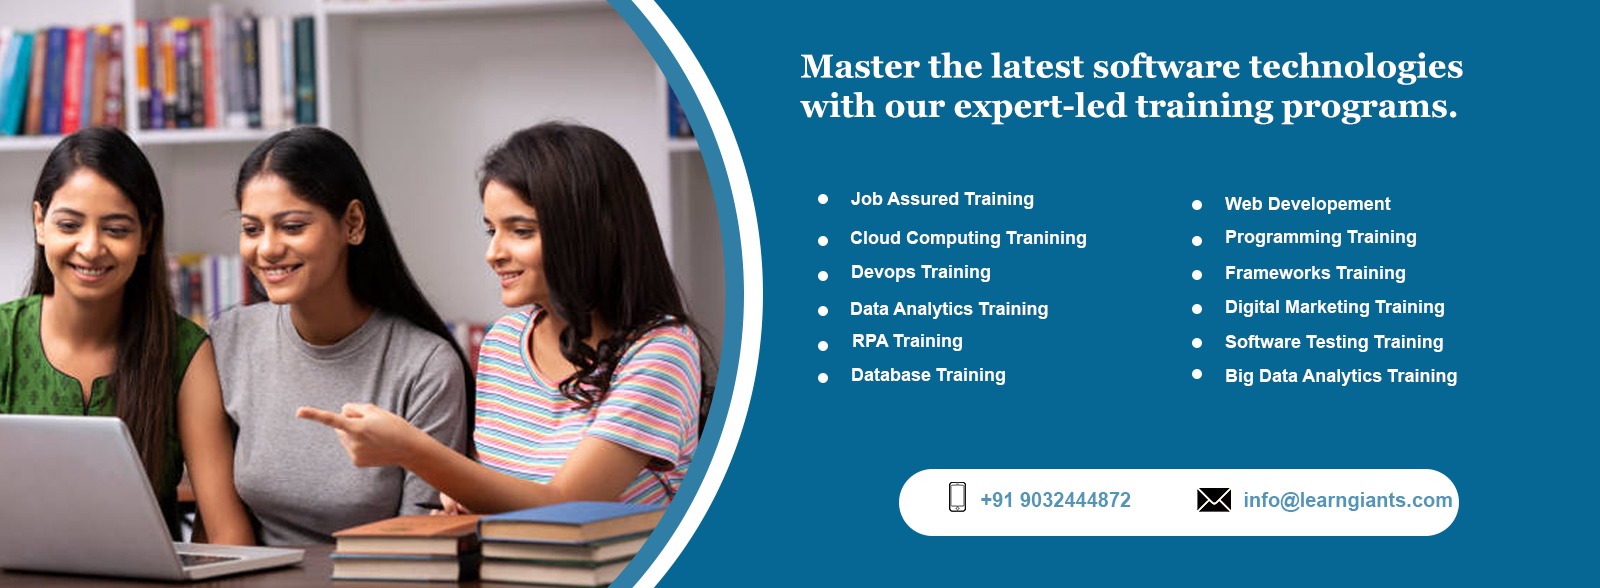 software training institute in hyderabad with job placement